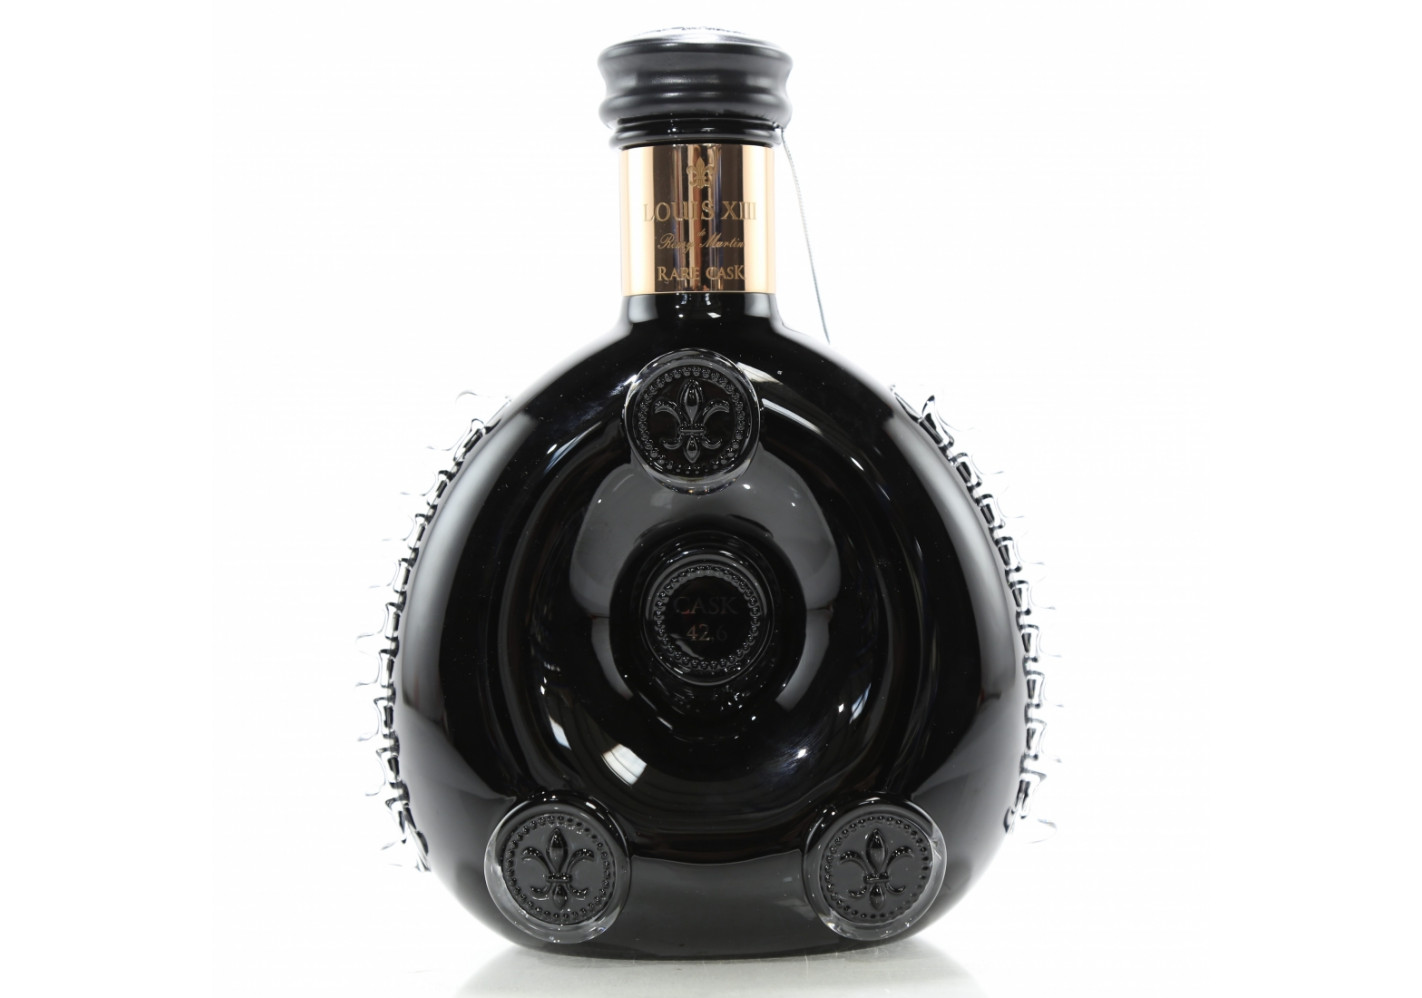 Louis XIII: The Rarest Cask Yet? – Robb Report